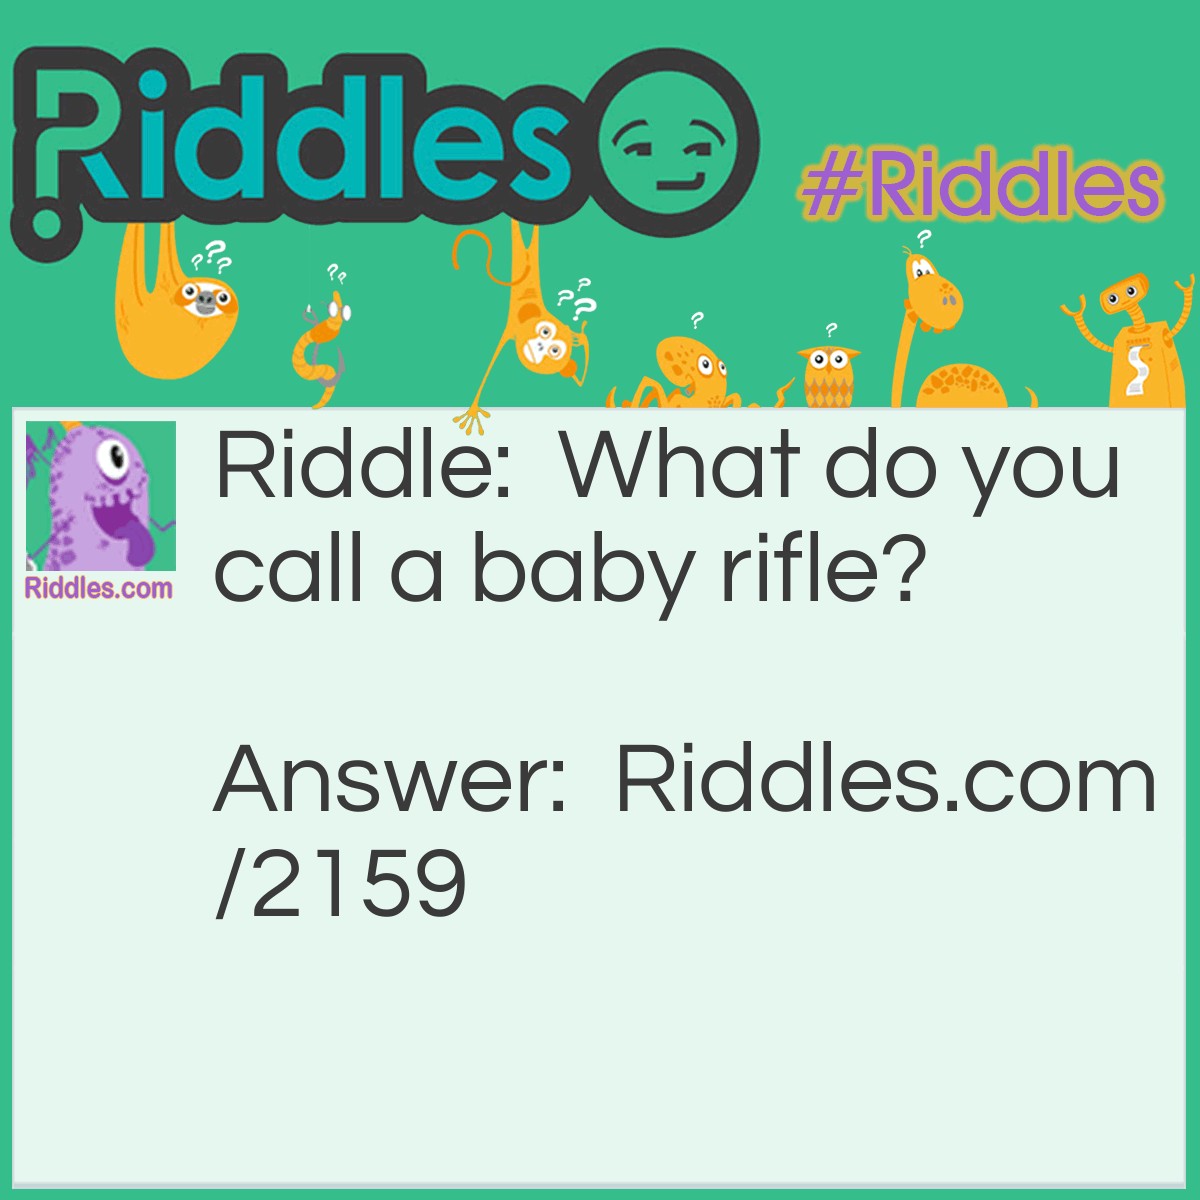 Riddle: What do you call a baby rifle? Answer: Son of a gun.